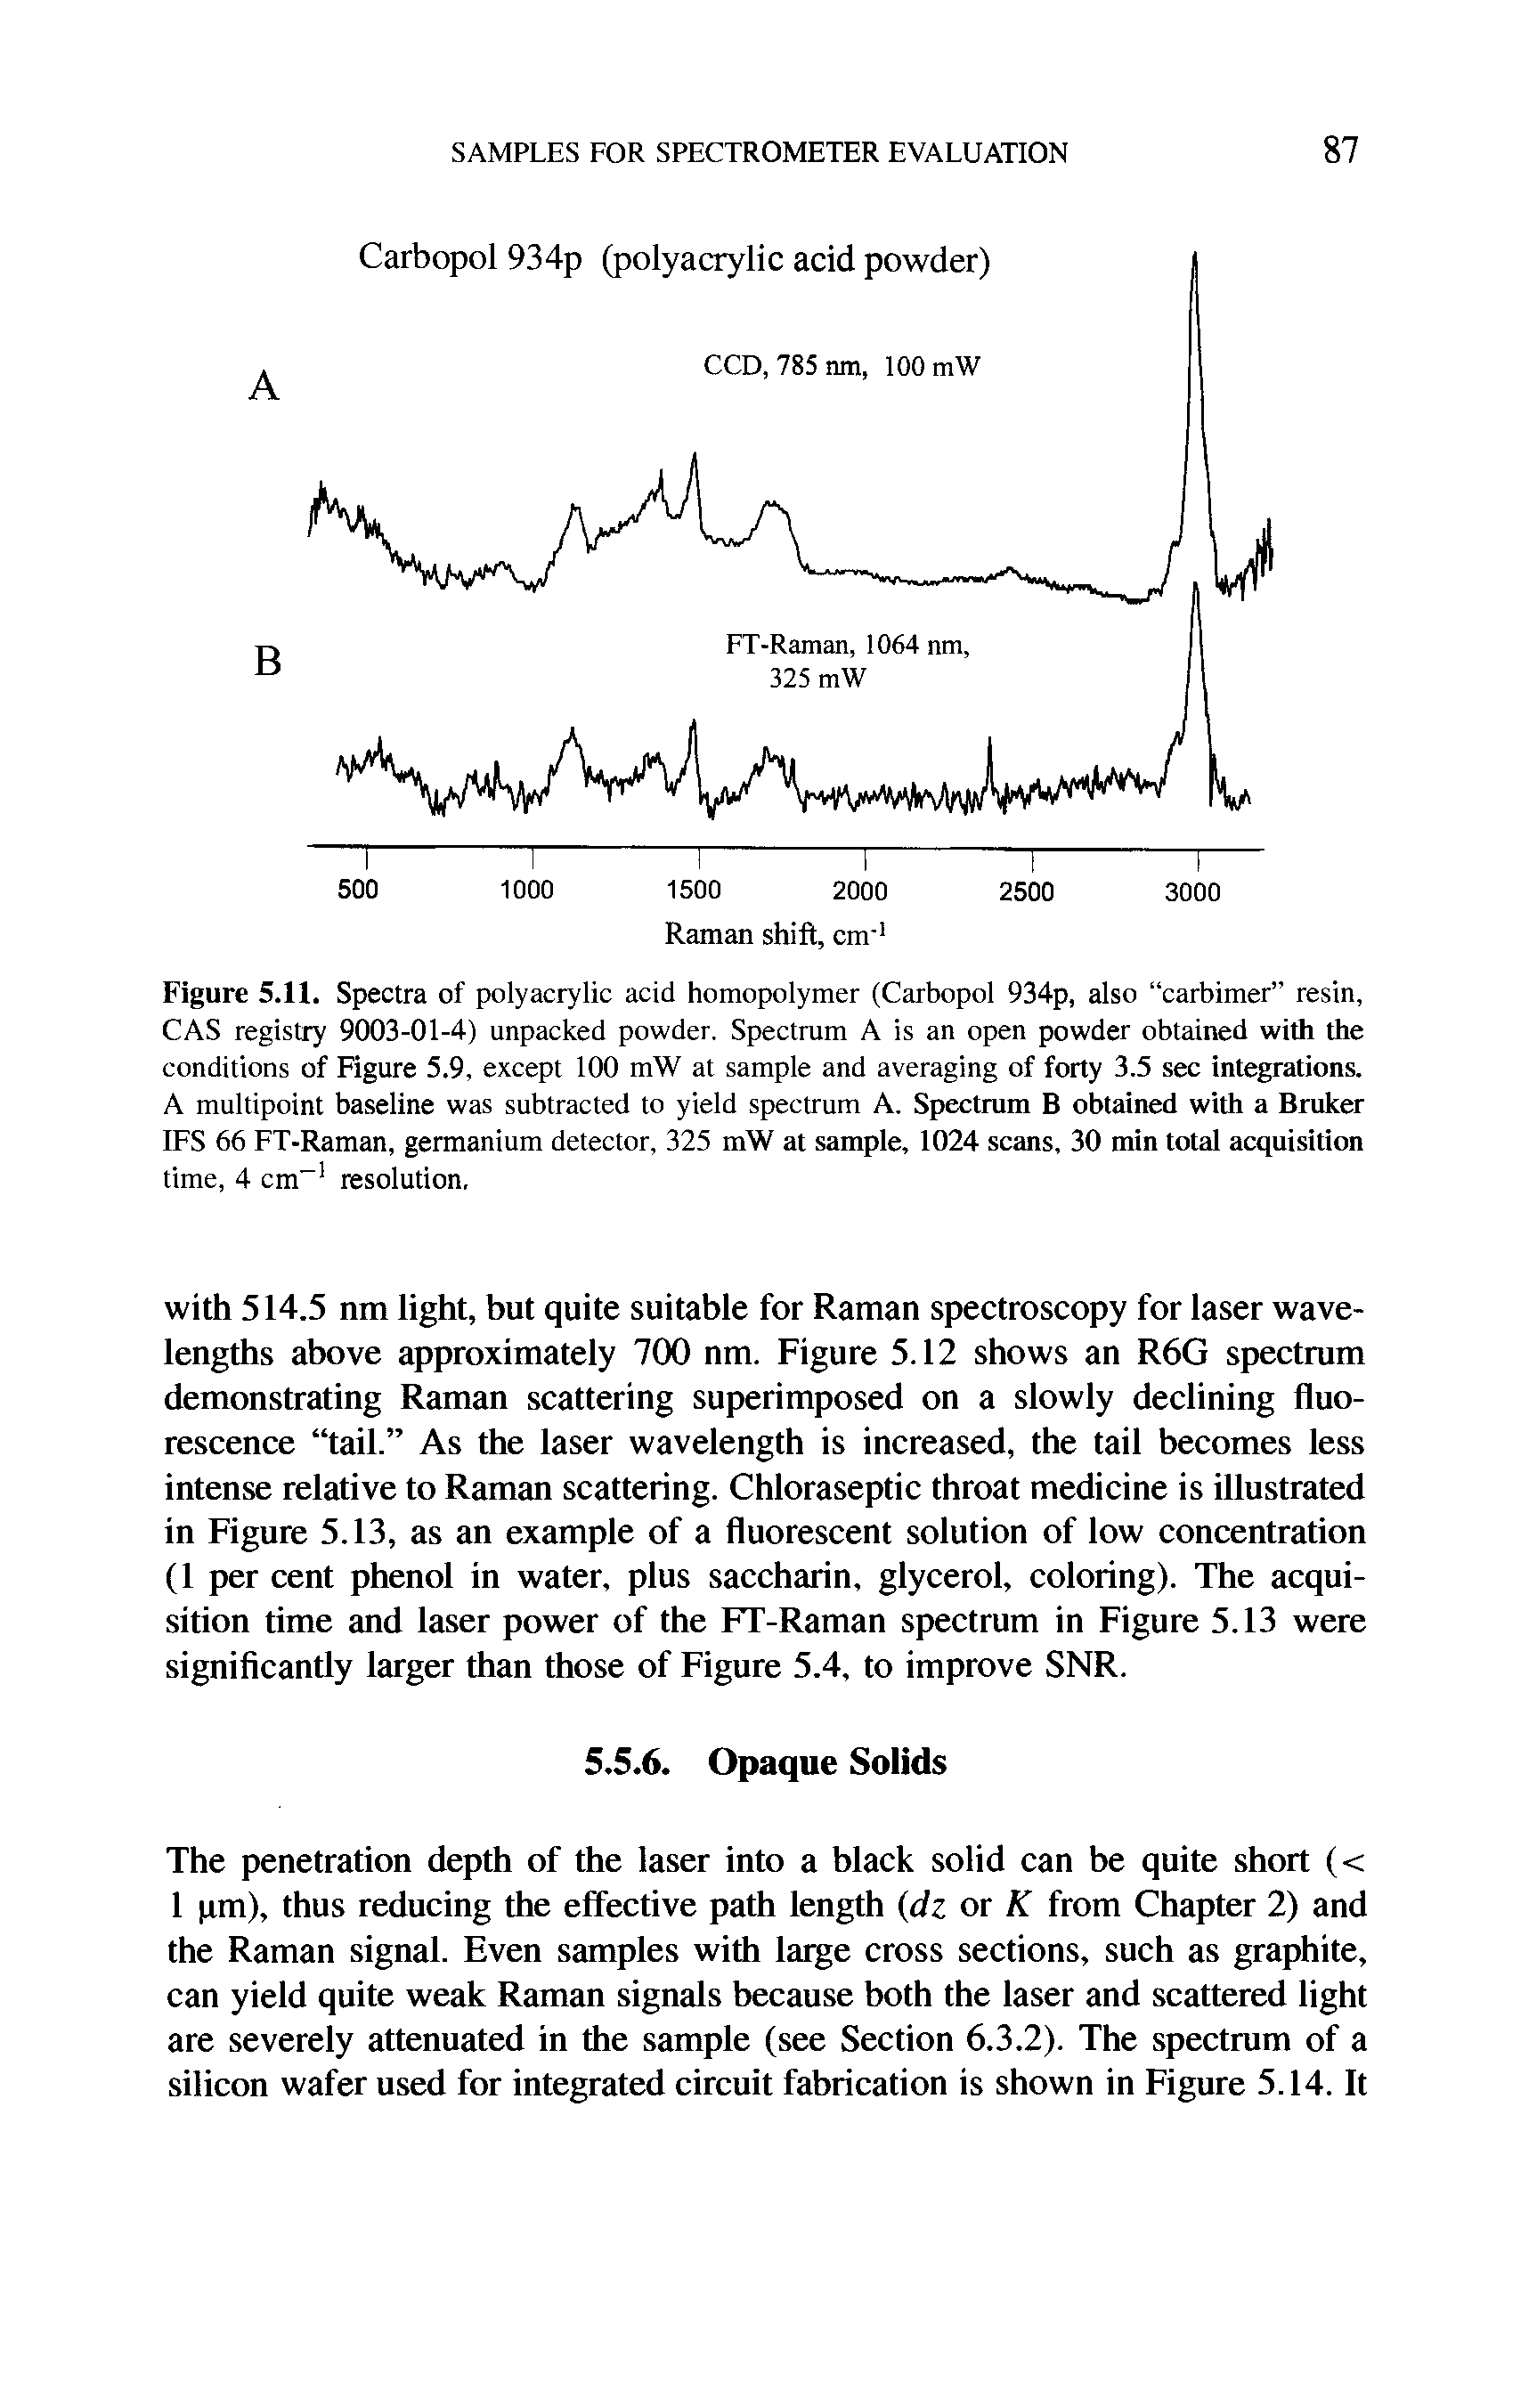 Figure 5.11. Spectra of polyacrylic acid homopolymer (Carbopol 934p, also carbimer resin, CAS registry 9003-01-4) unpacked powder. Spectrum A is an open powder obtained with the conditions of Figure 5.9, except 100 mW at sample and averaging of forty 3.5 sec integrations. A multipoint baseline was subtracted to yield spectrum A. Spectrum B obtained with a Bruker IFS 66 FT-Raman, germanium detector, 325 mW at sample, 1024 scans, 30 min total acquisition time, 4 cm" resolution.